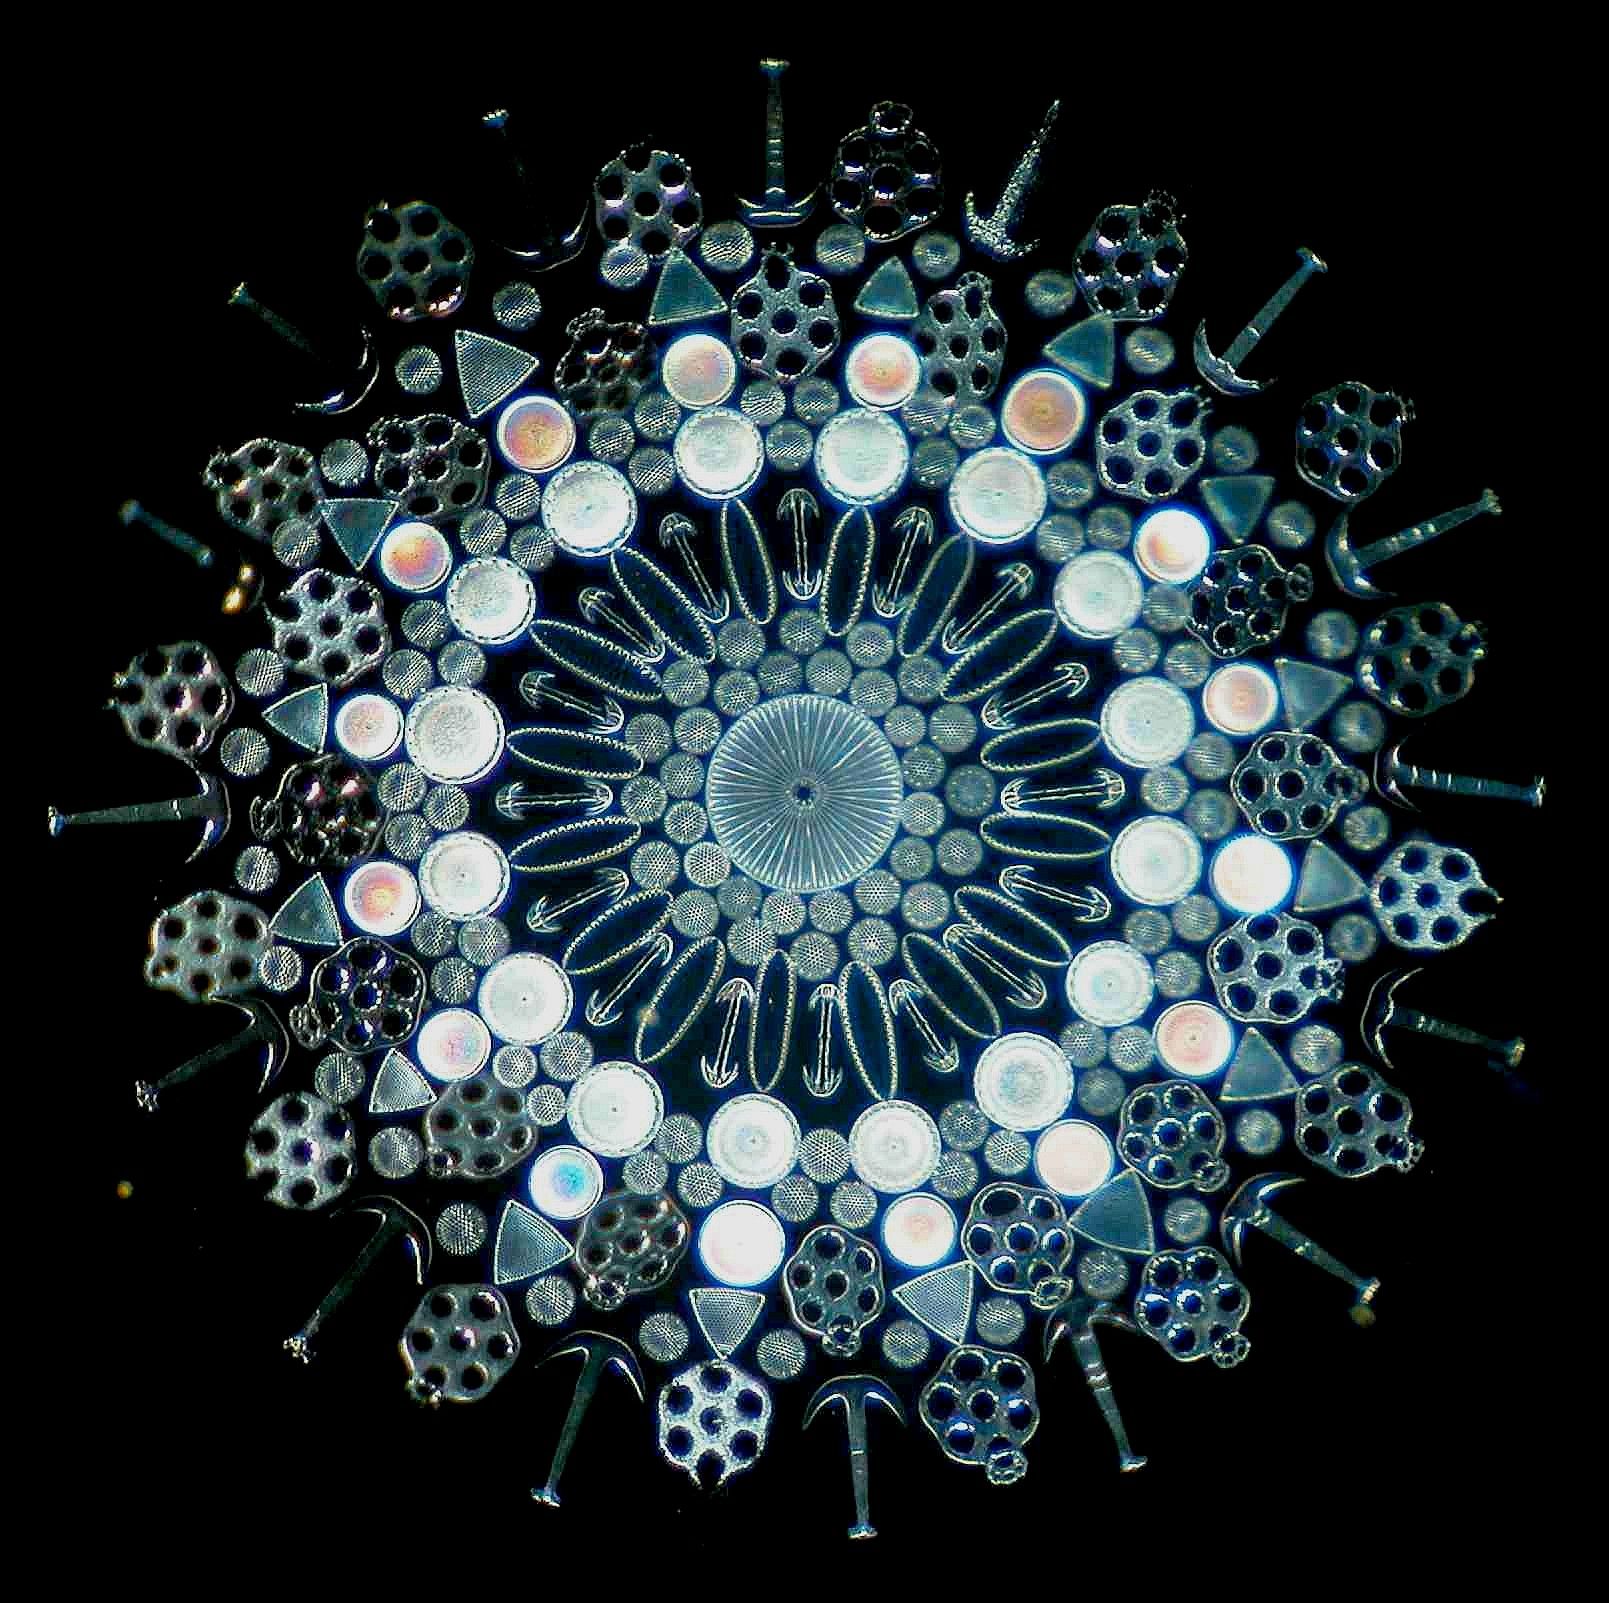 Arranged Exhibition Slide comprised of Diatoms, Sponge Spicules, and Plates and Anchors of Synapta